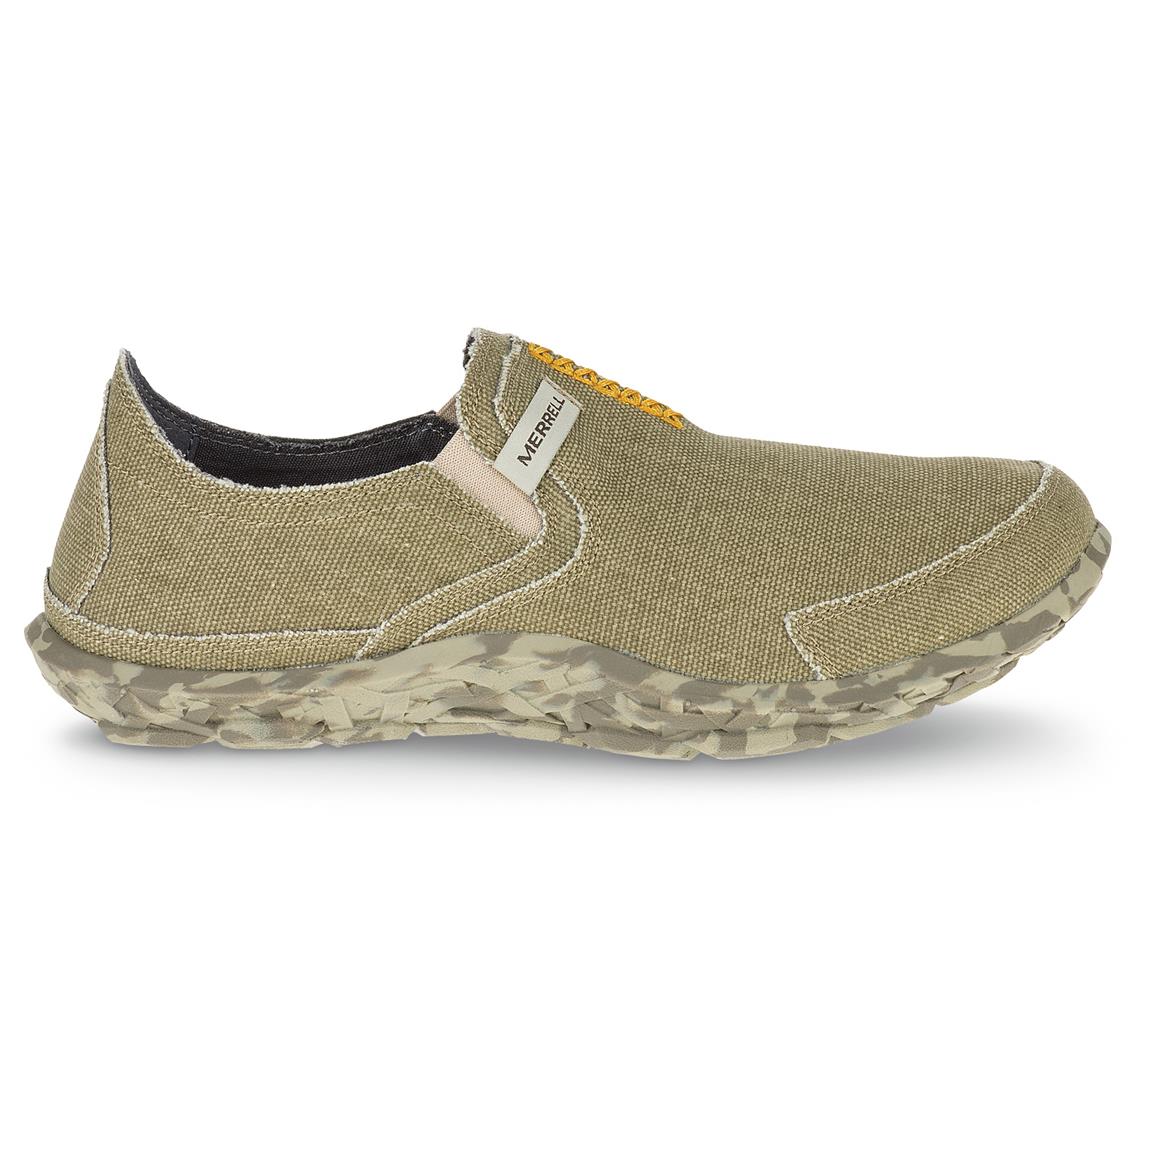 Merrell Men's Slipper Shoes - 665554, Casual Shoes at Sportsman's Guide